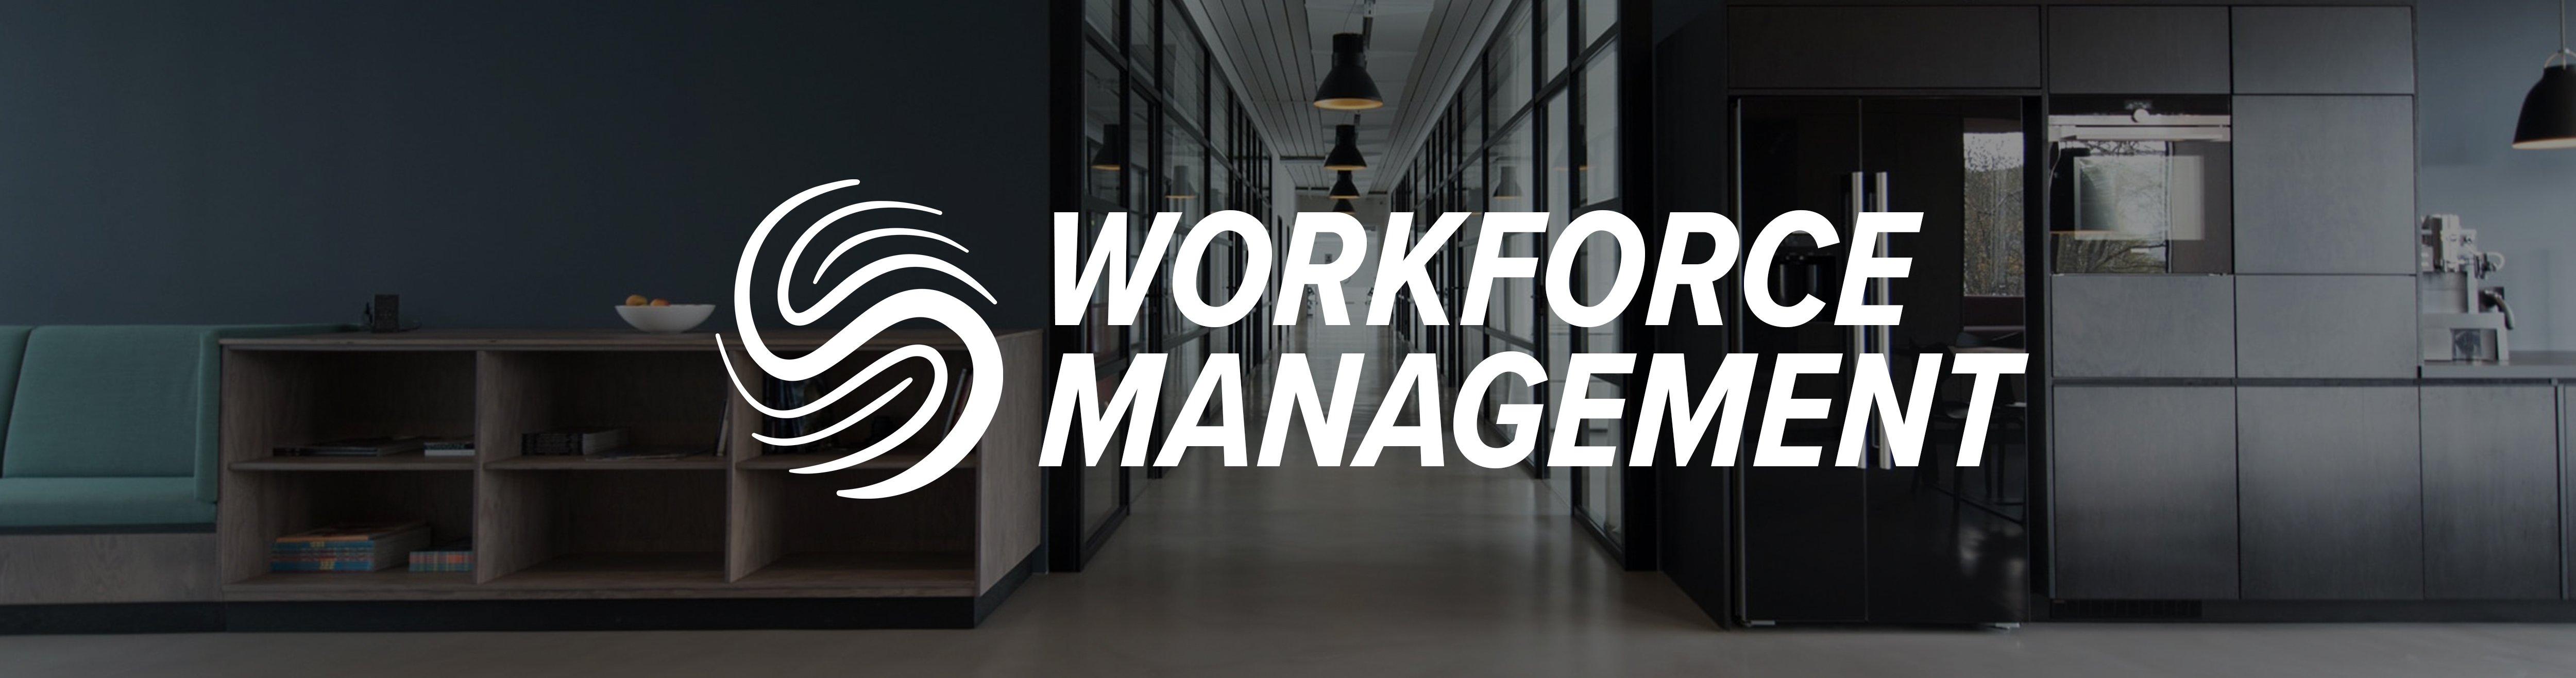 Workforce Management with Portland's Specialized Recruiting Group